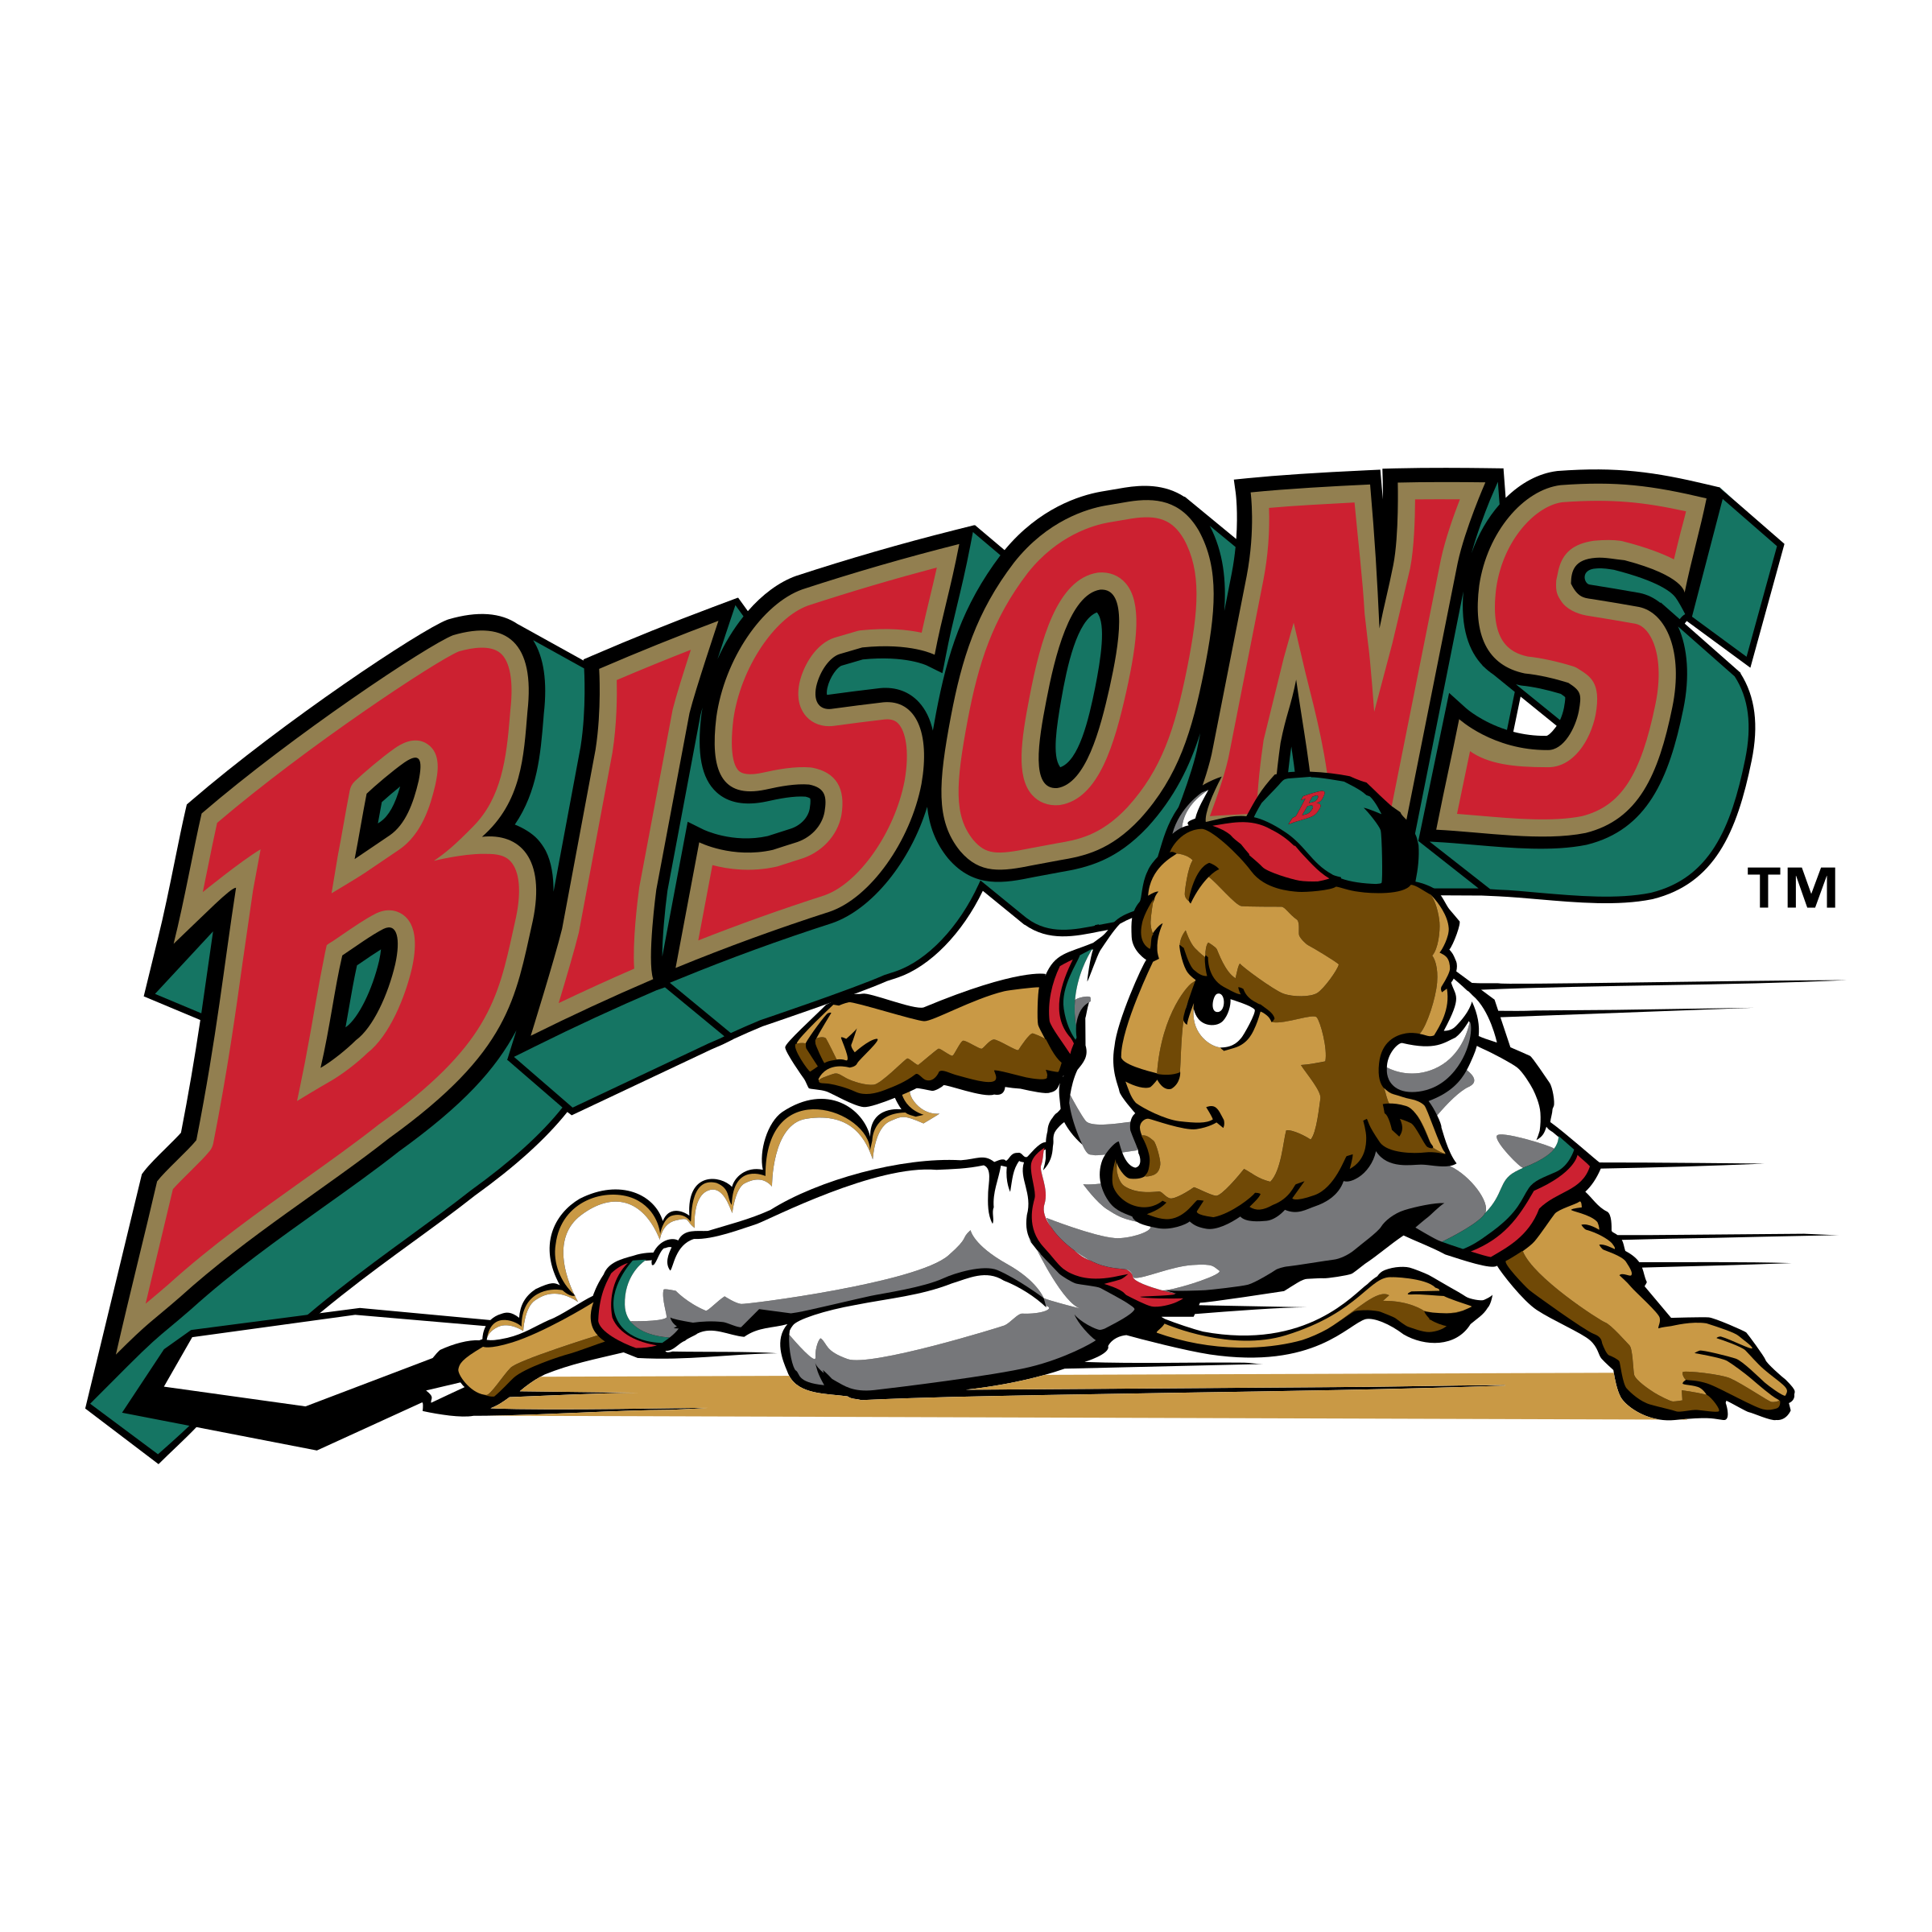 Buffalo Bisons Background PNG Image